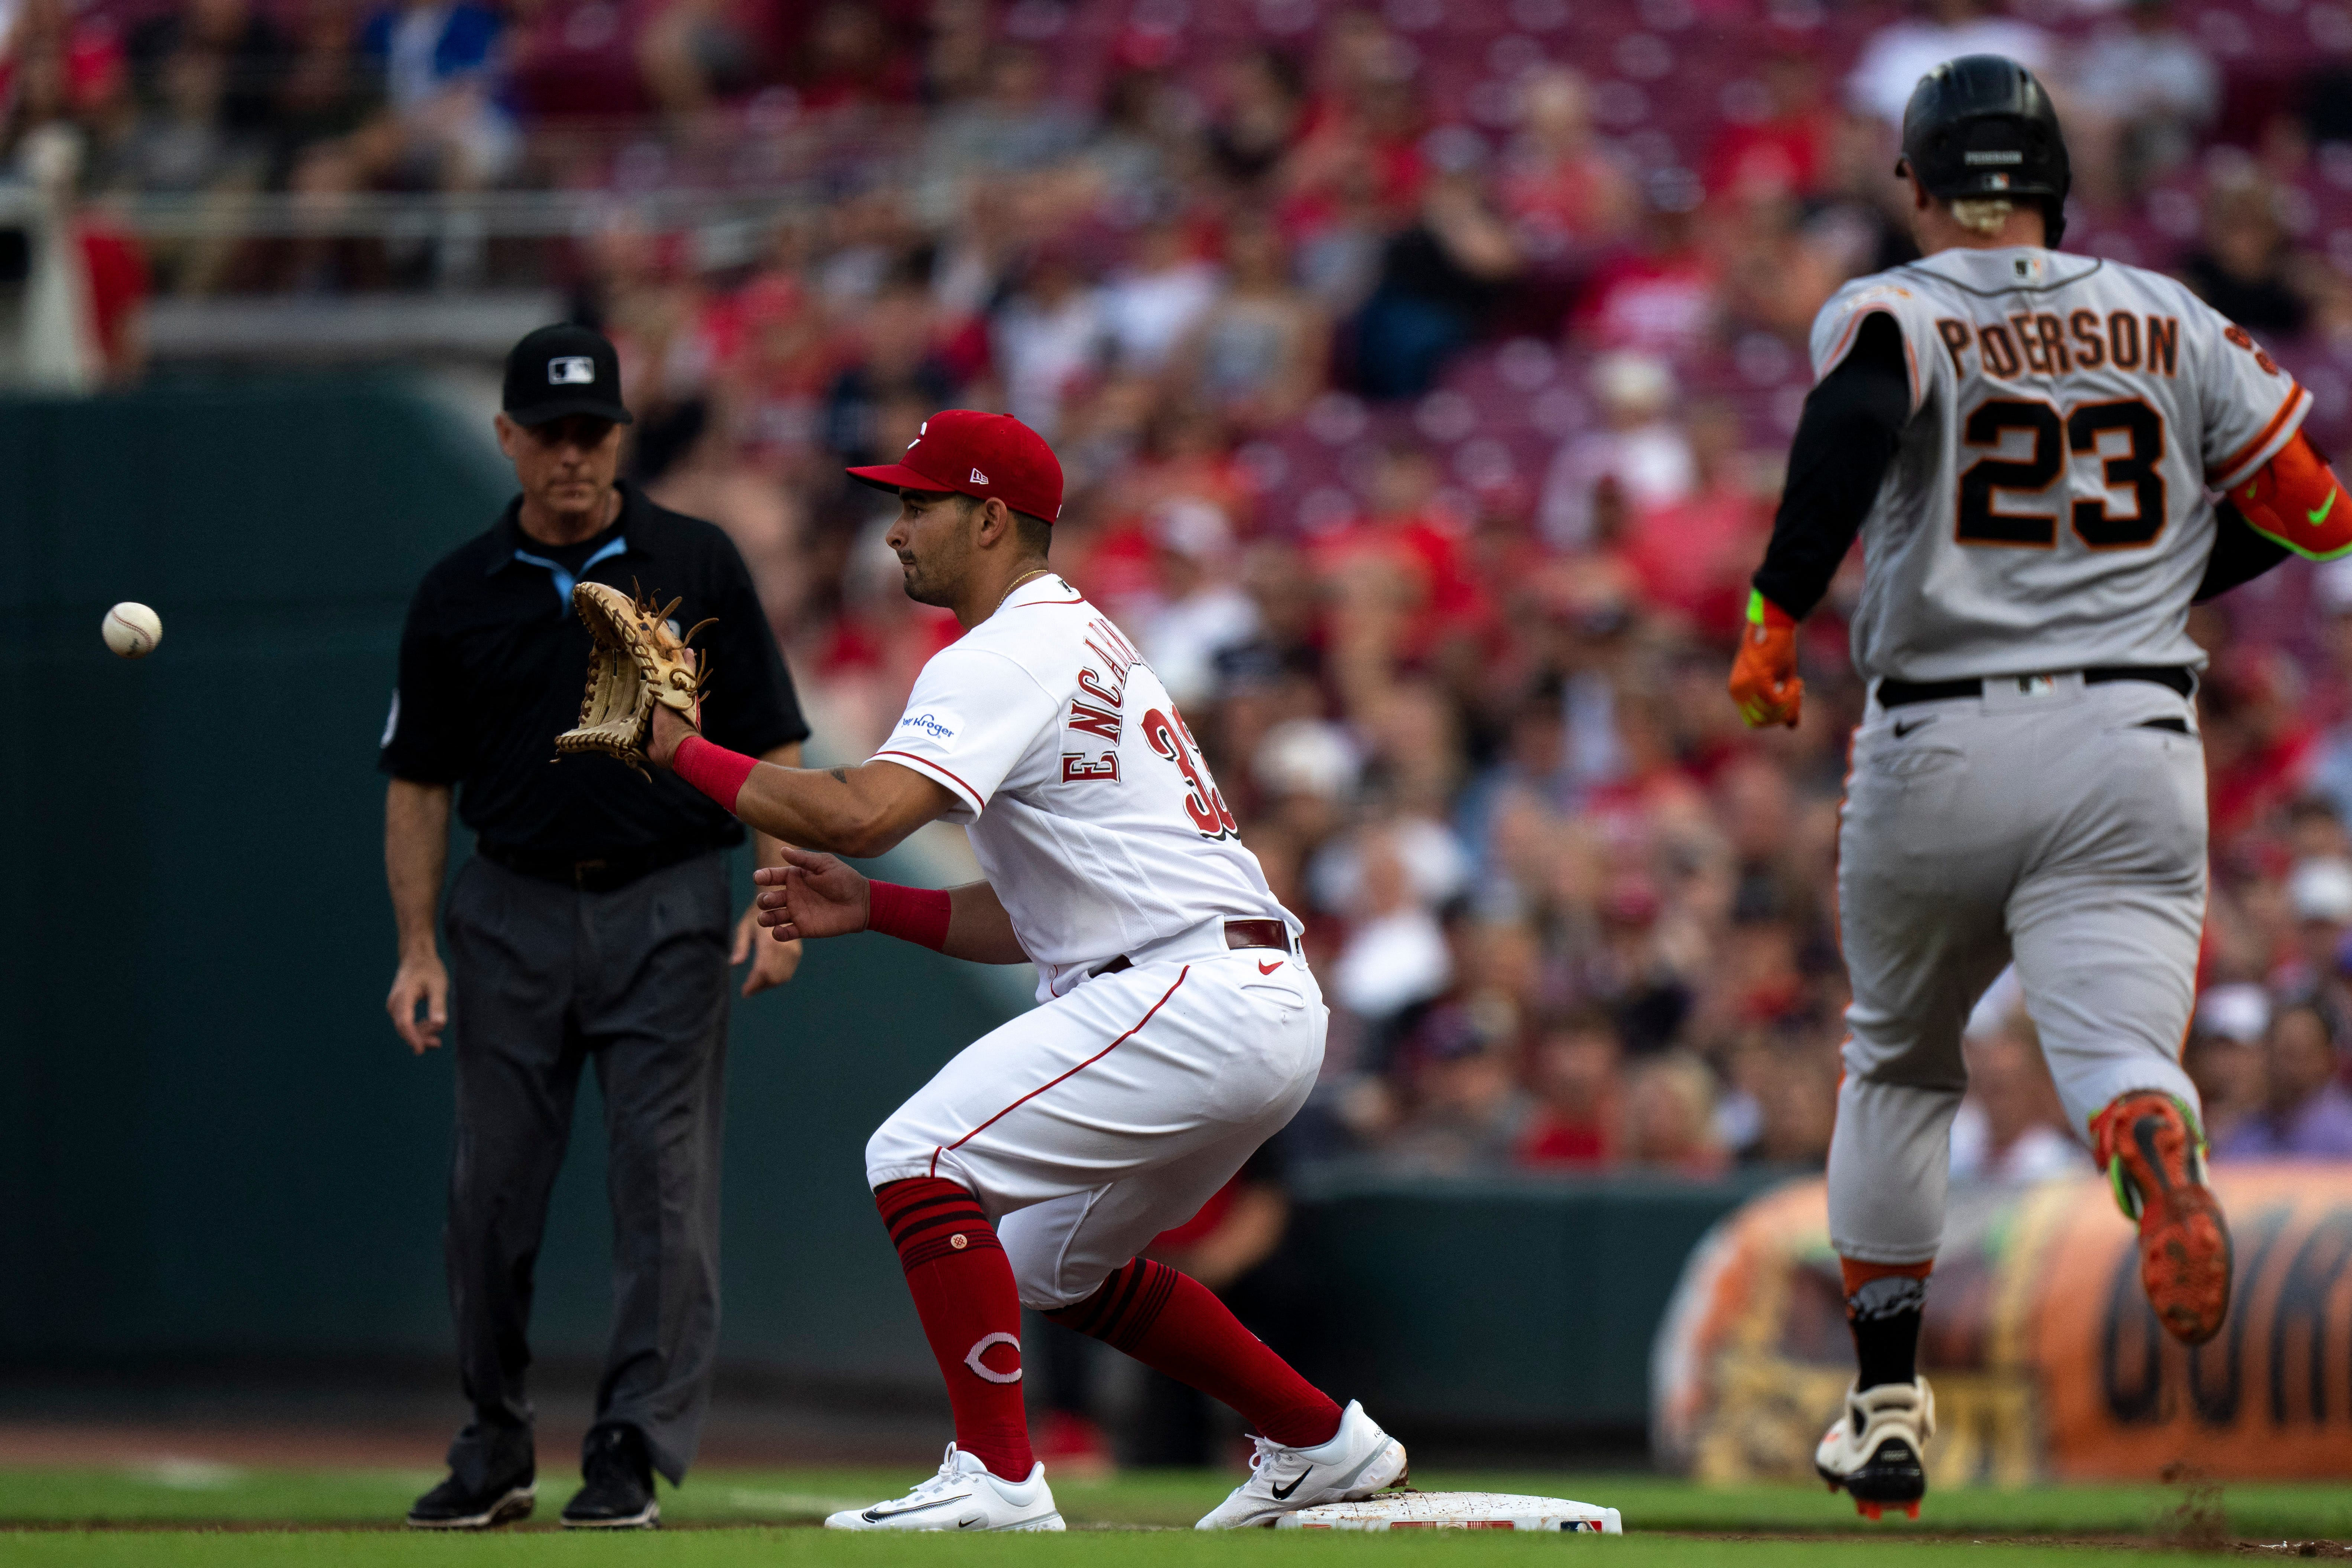 Reds snap seven-game losing streak with 1-0 win over Nationals